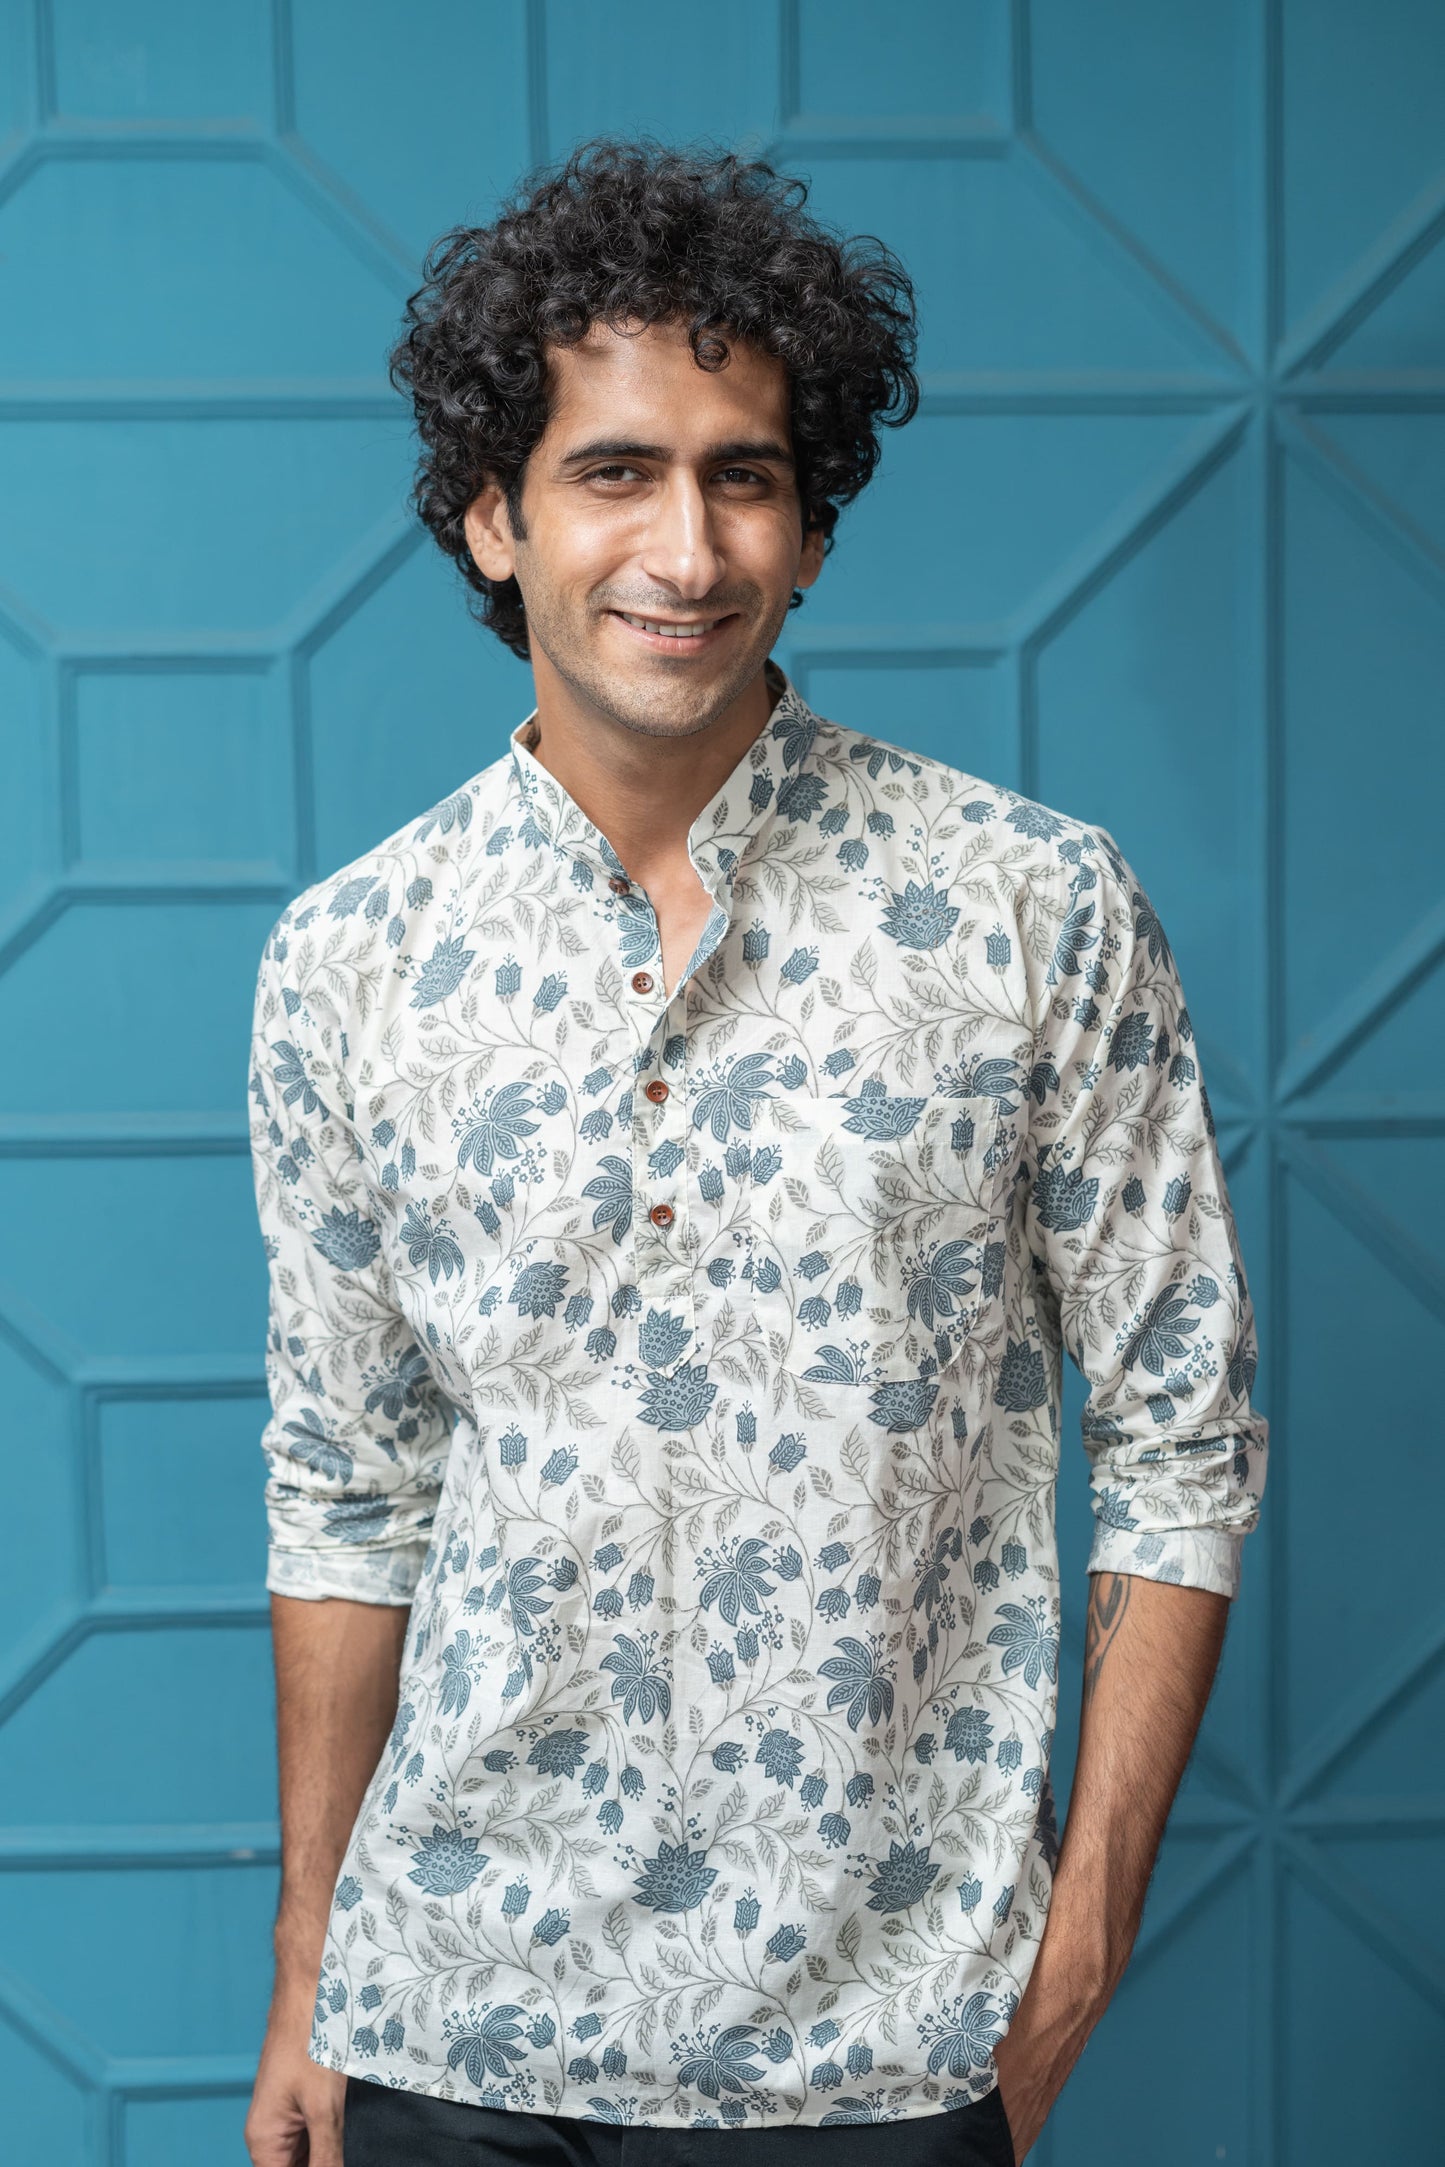 The White Short Kurta With All-Over Floral Print